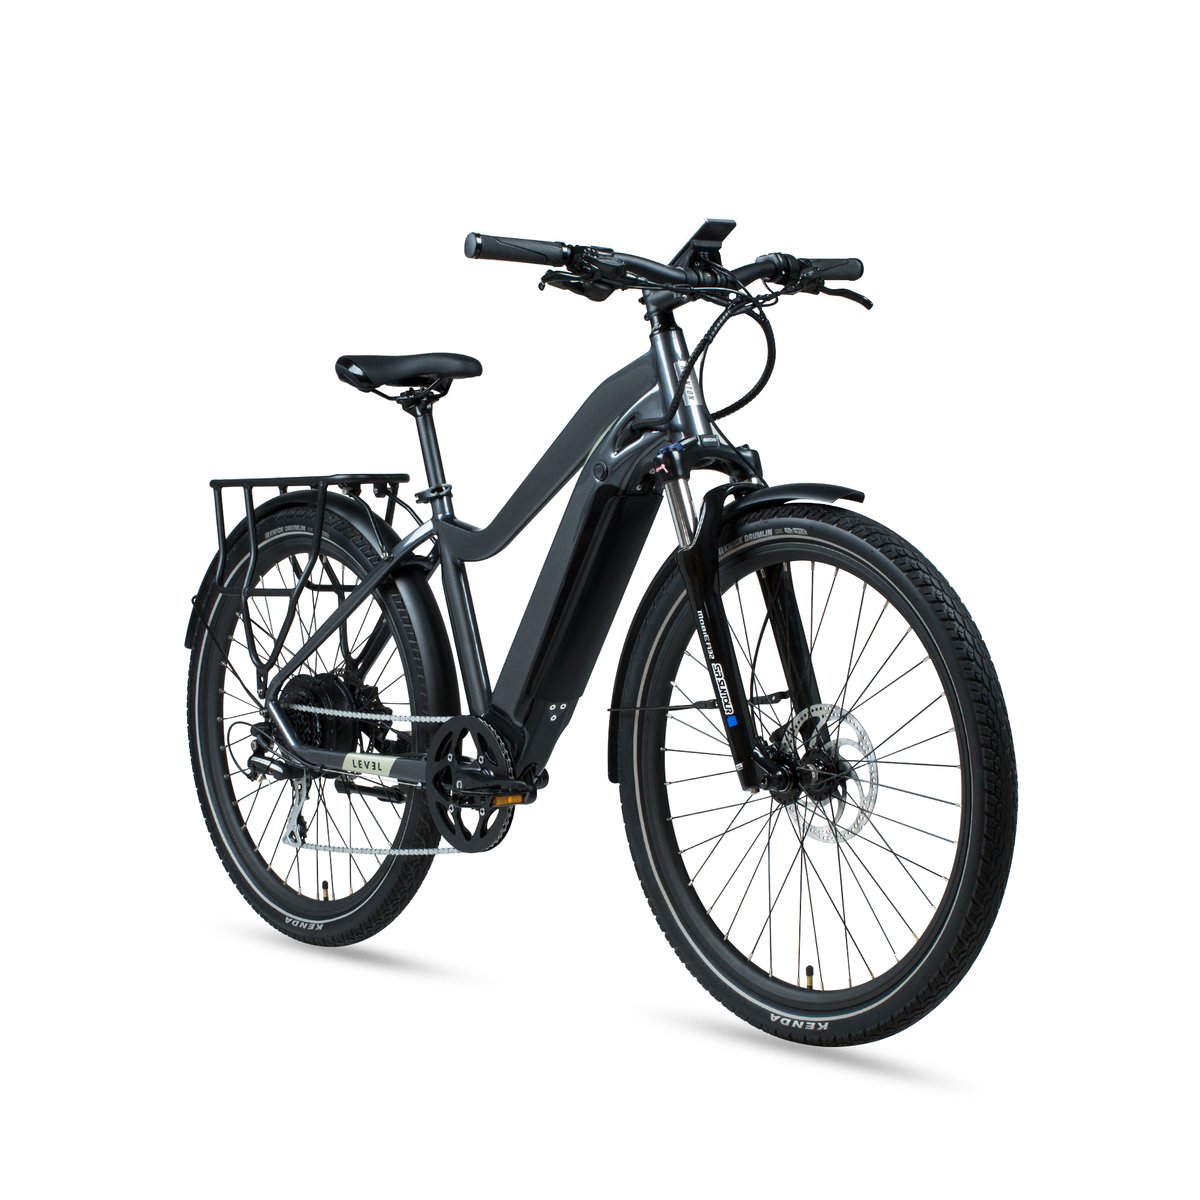 6 of the Best Electric Bikes for Commuting to Work or School